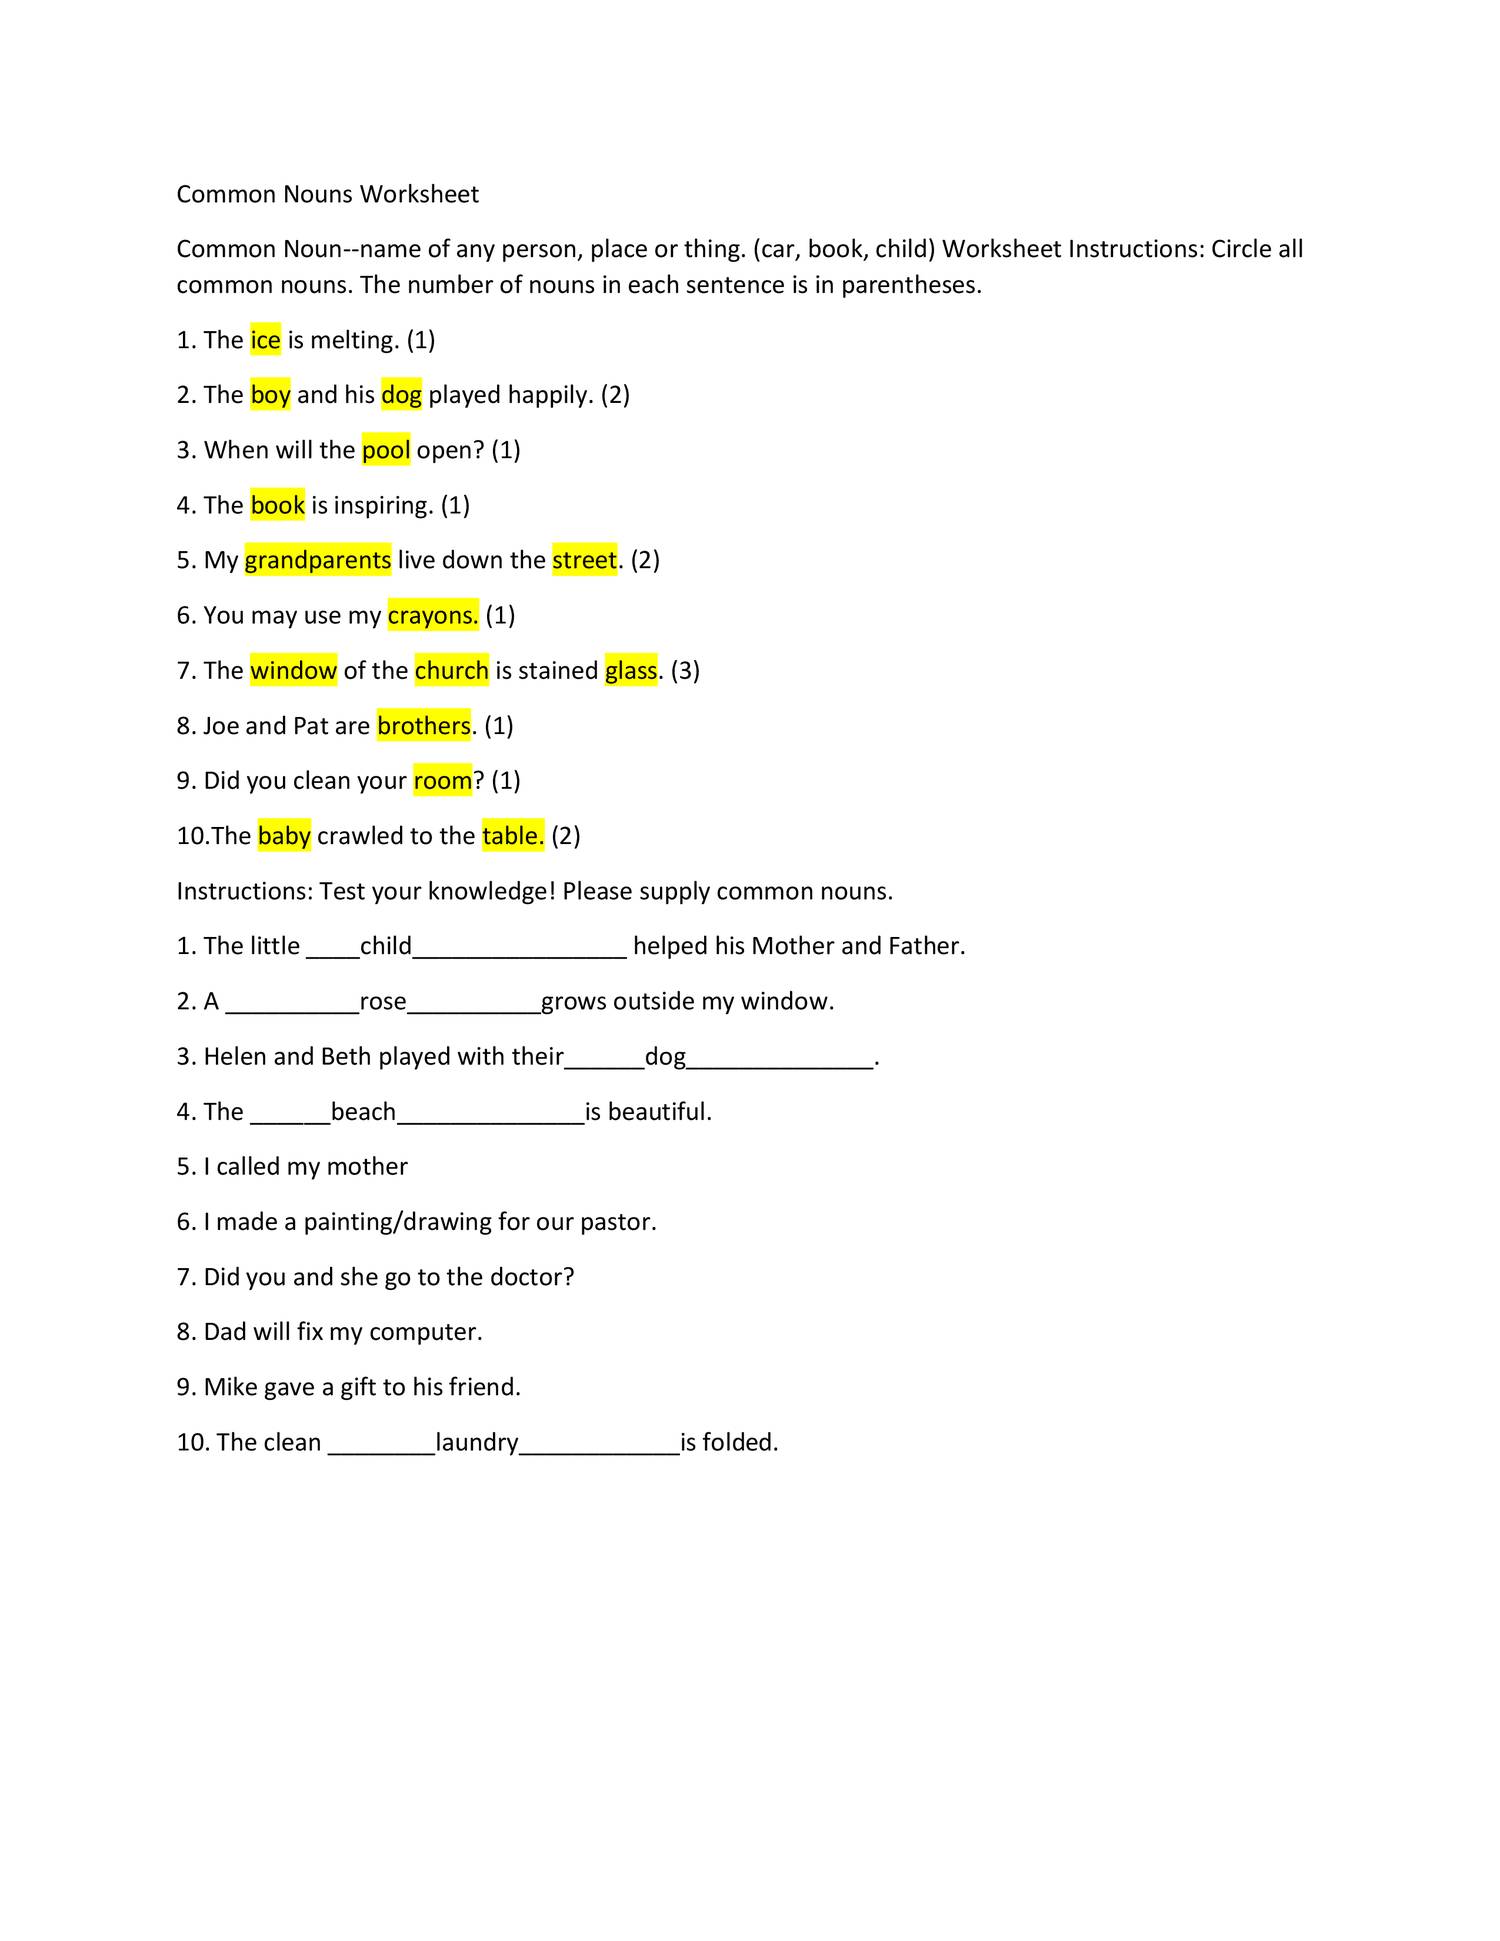 common-nouns-worksheet-answers-docx-docdroid